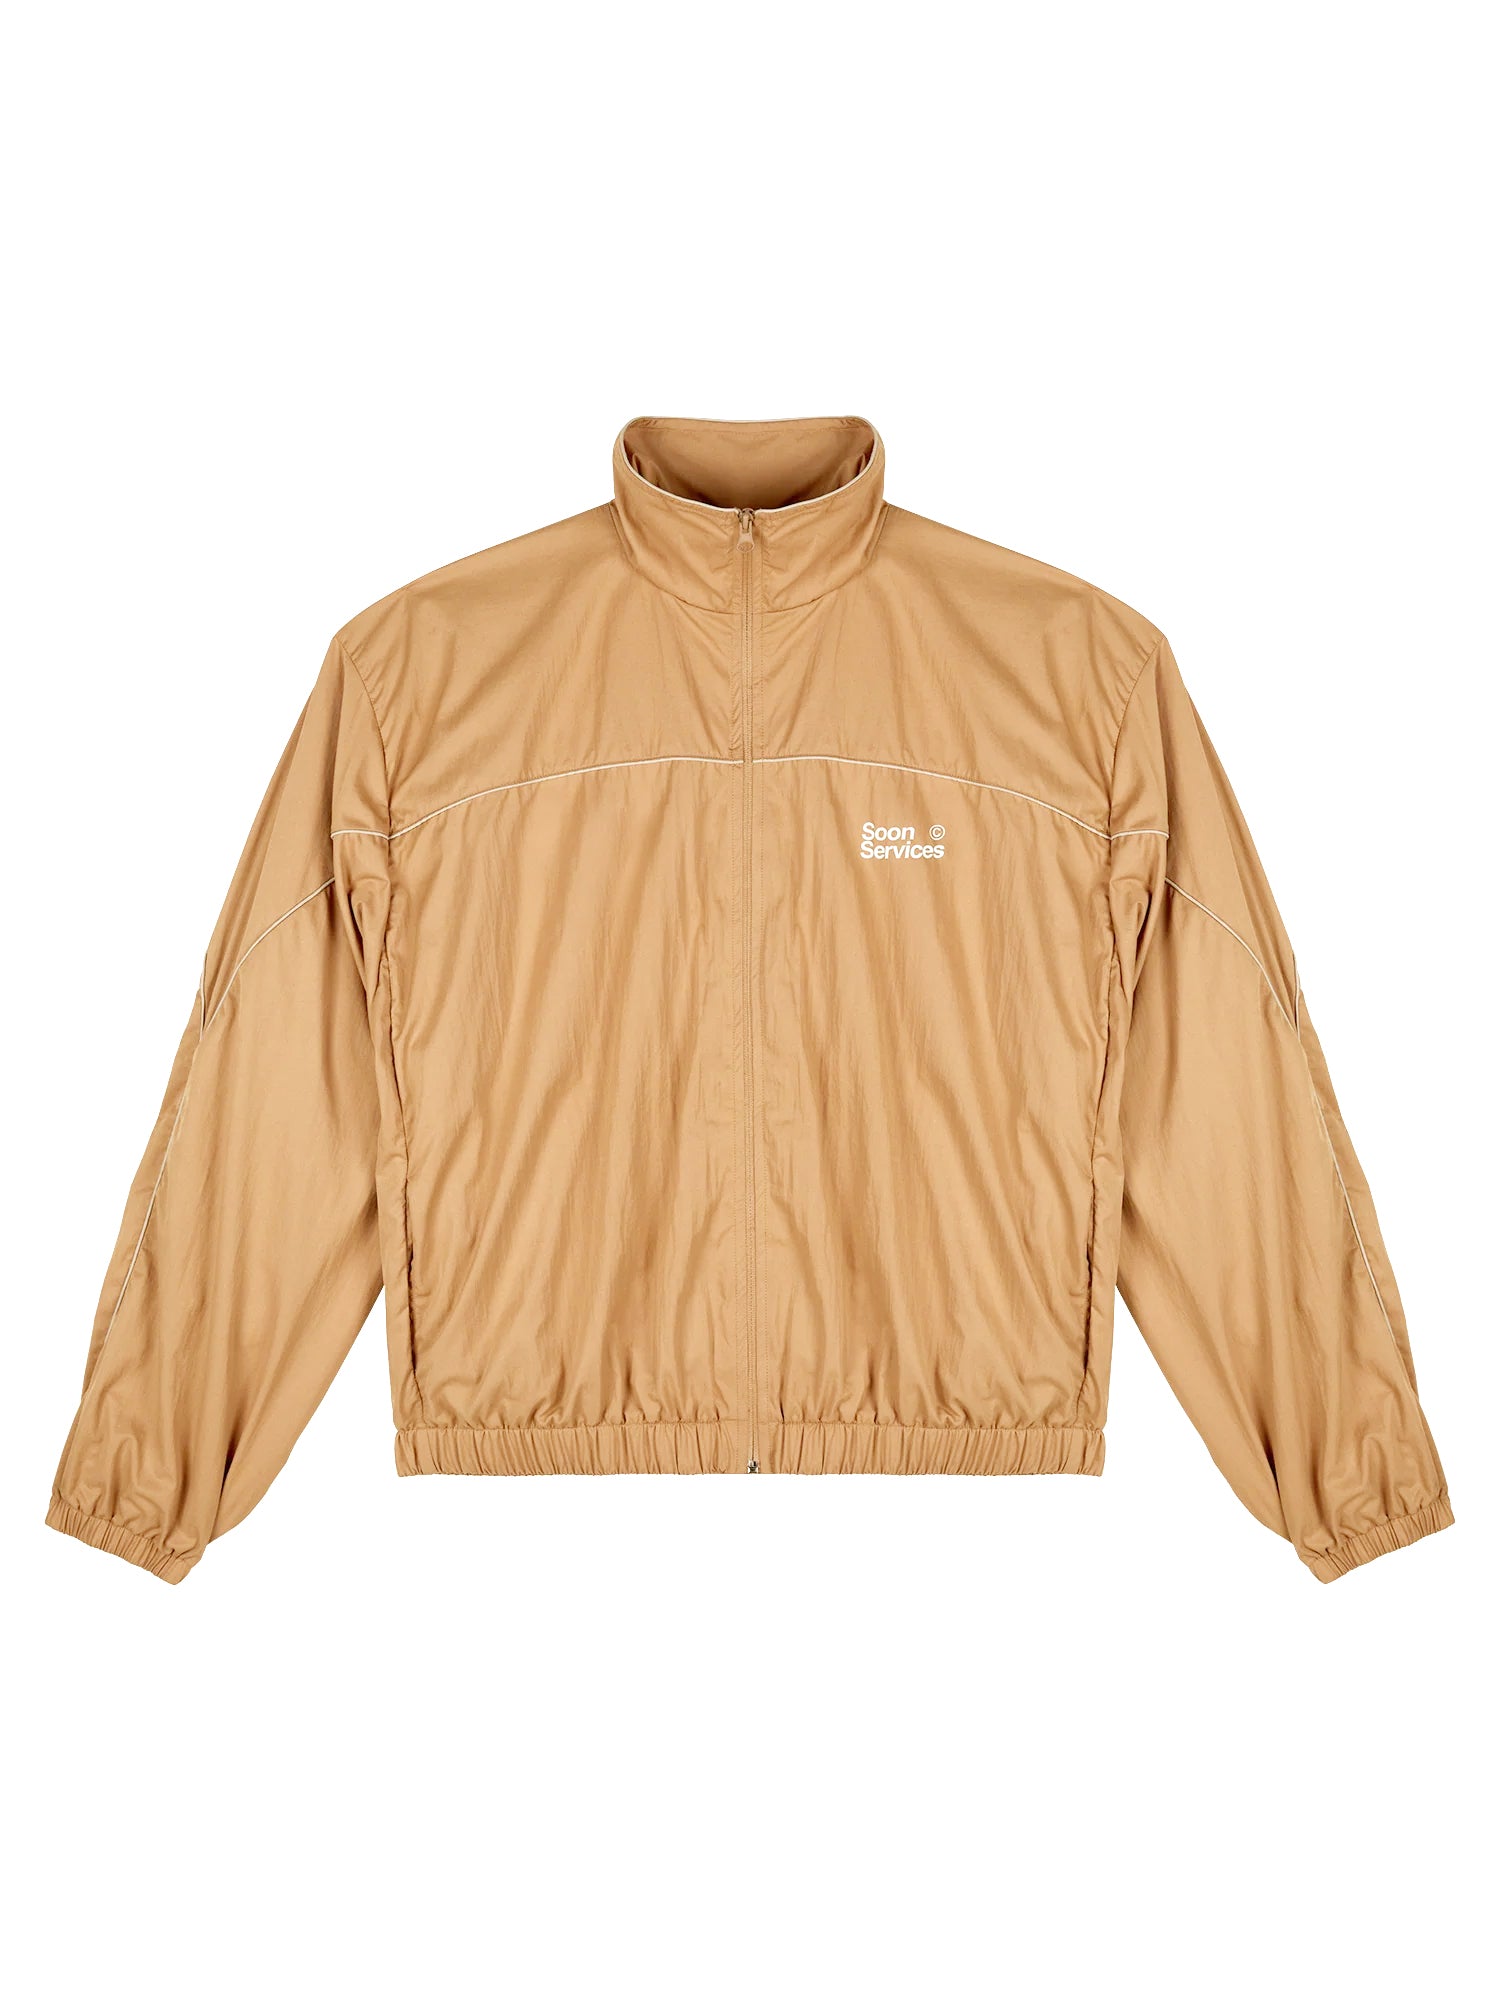 Soon Services Track Jacket